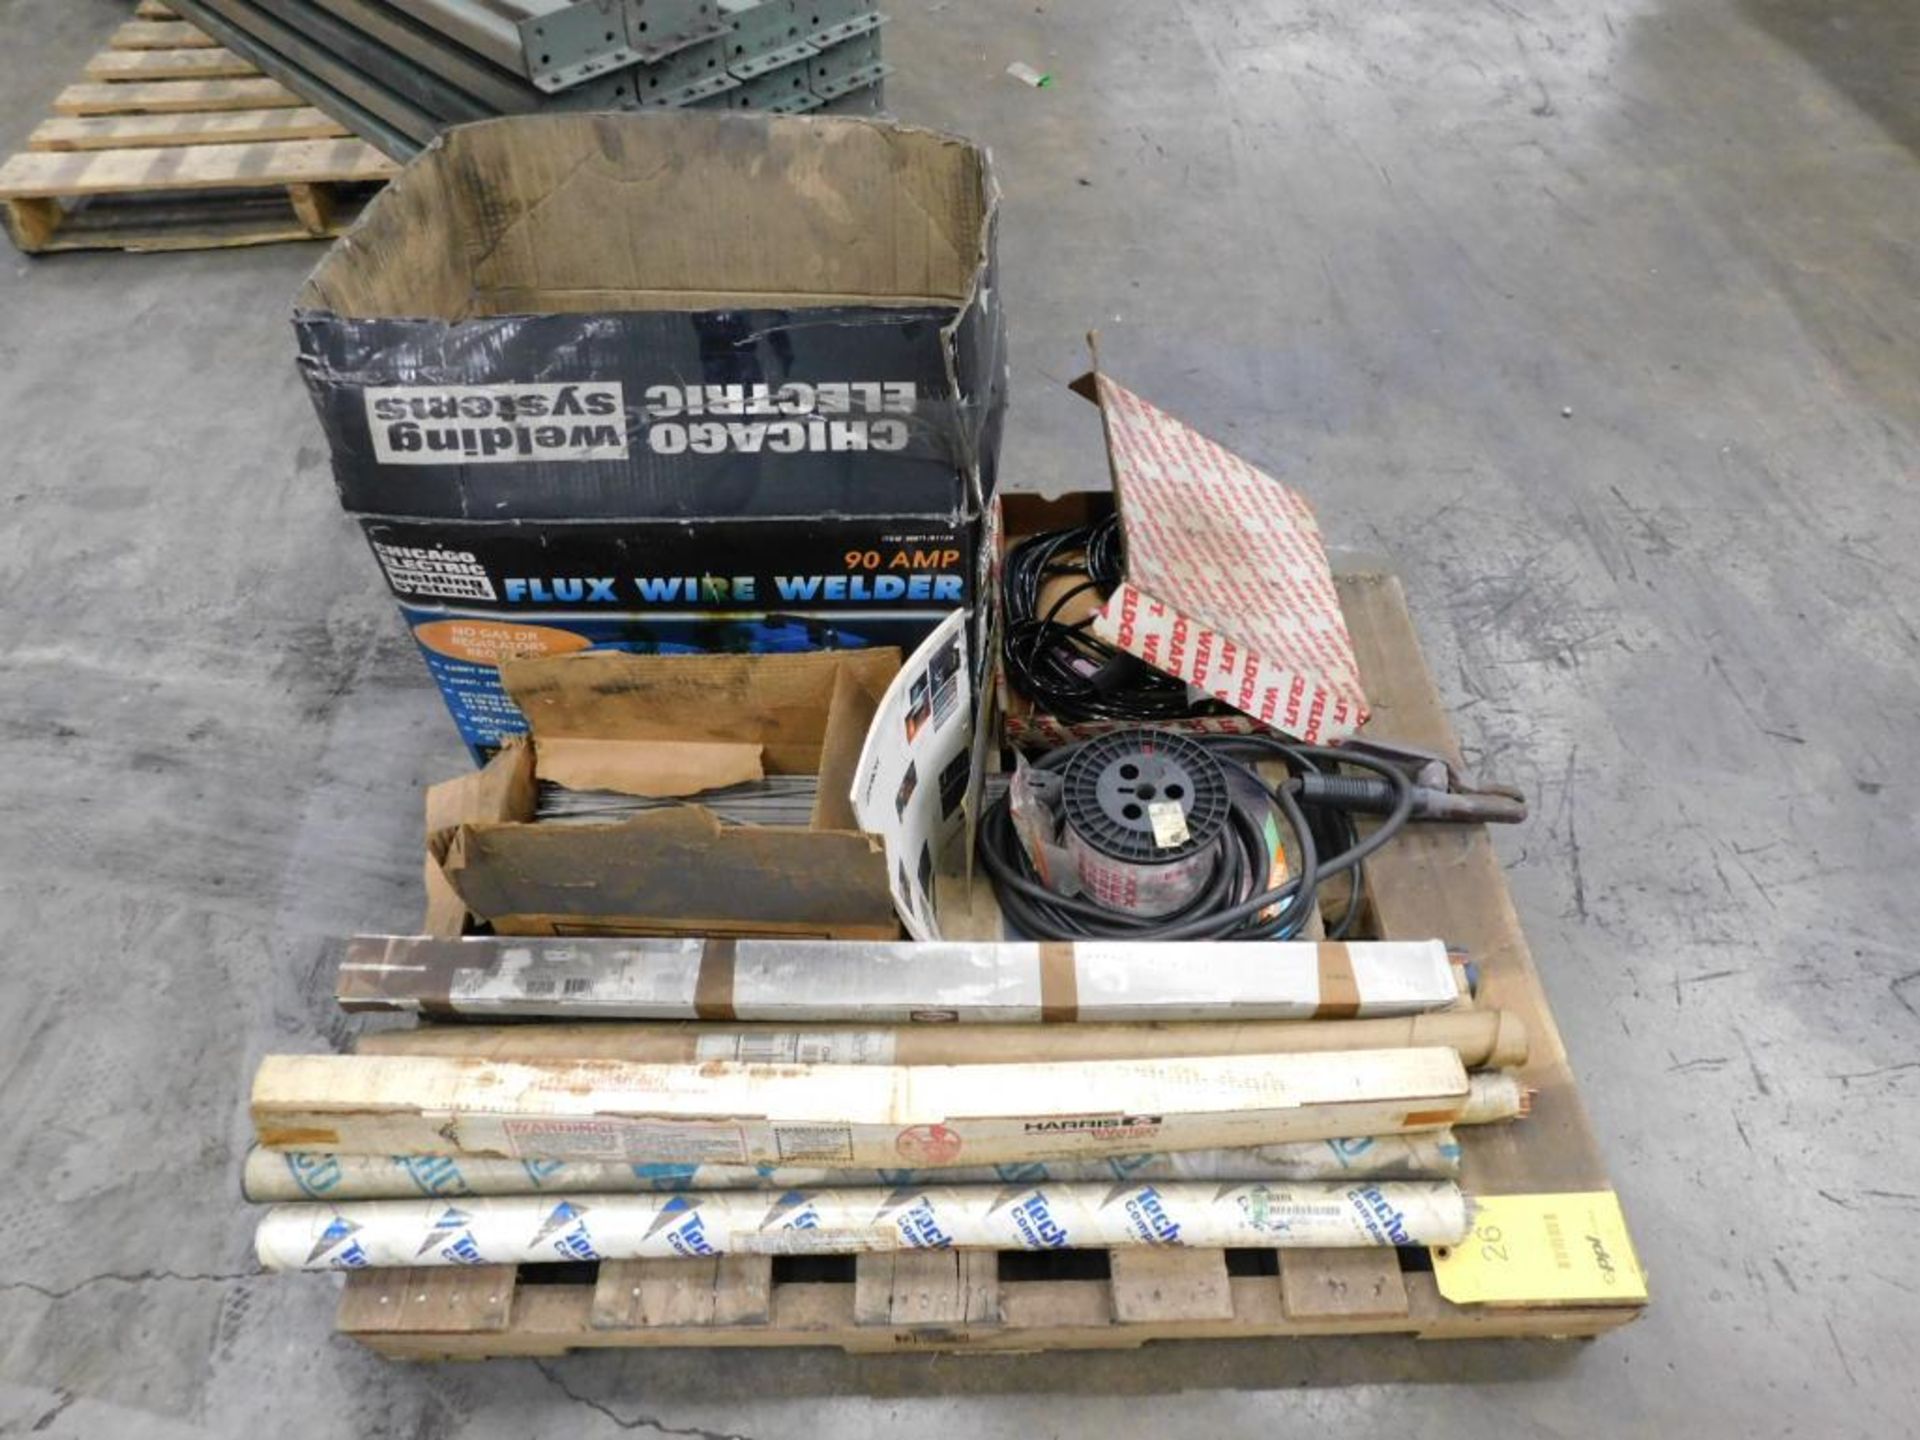 LOT: Chicago Electric Flux Wire Welder, 90 Amp., 120 Volt, 24 Amps, Single Phase, Assorted Welding W